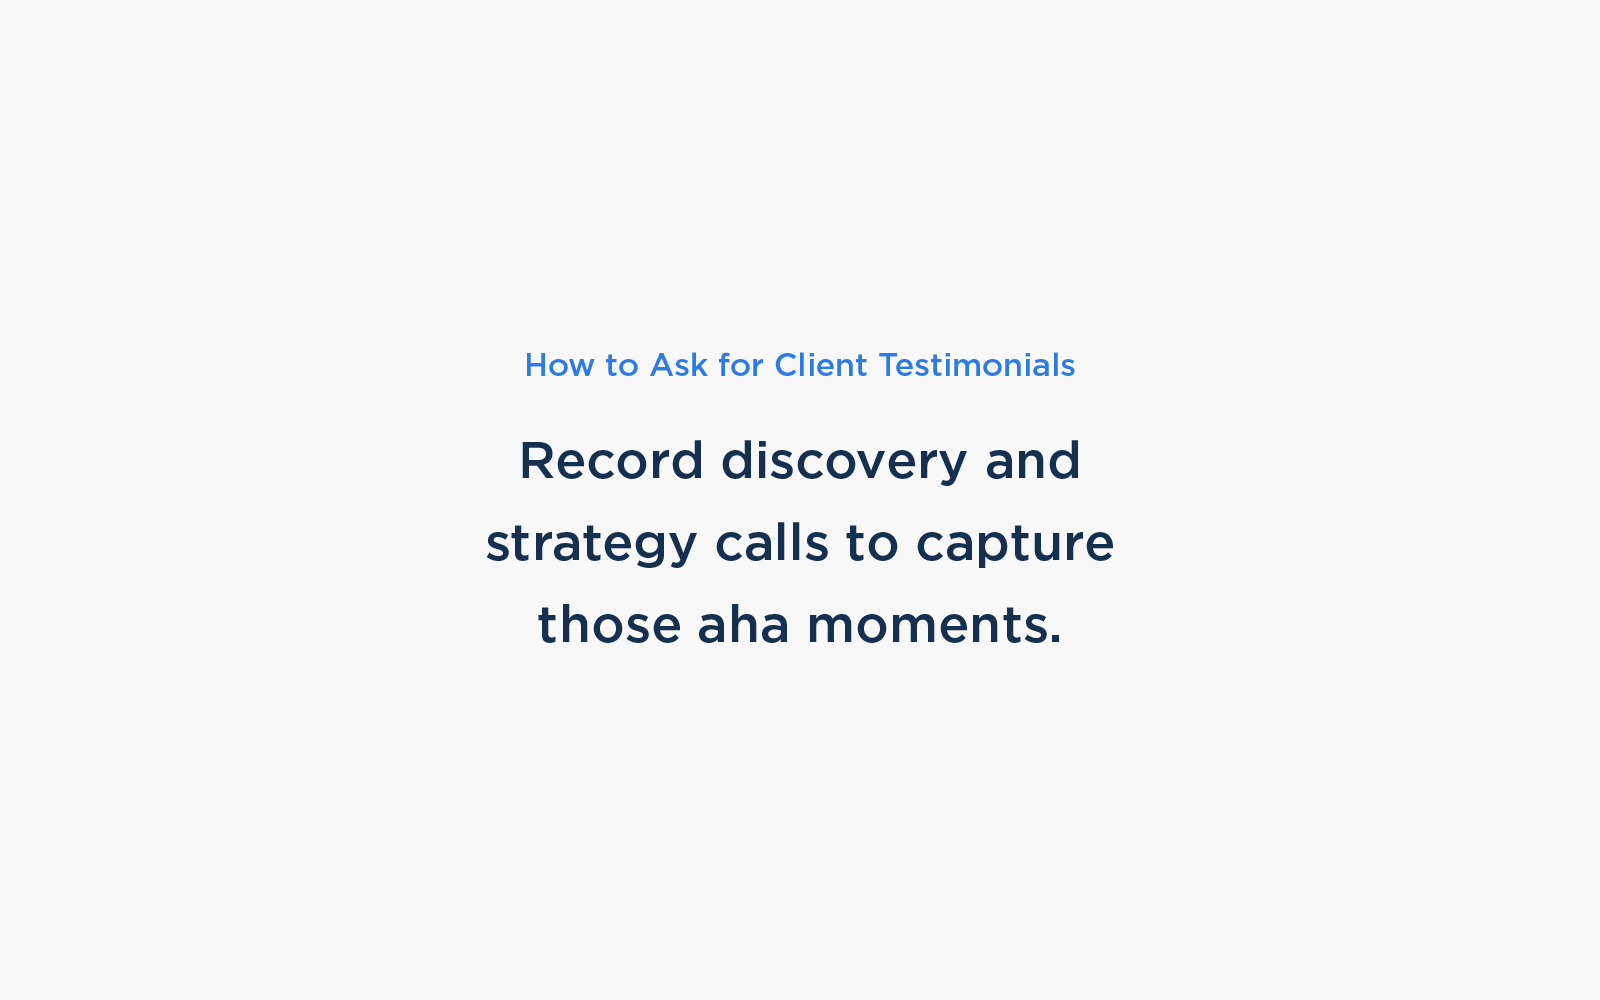 Record discovery and strategy calls to capture those aha moments.